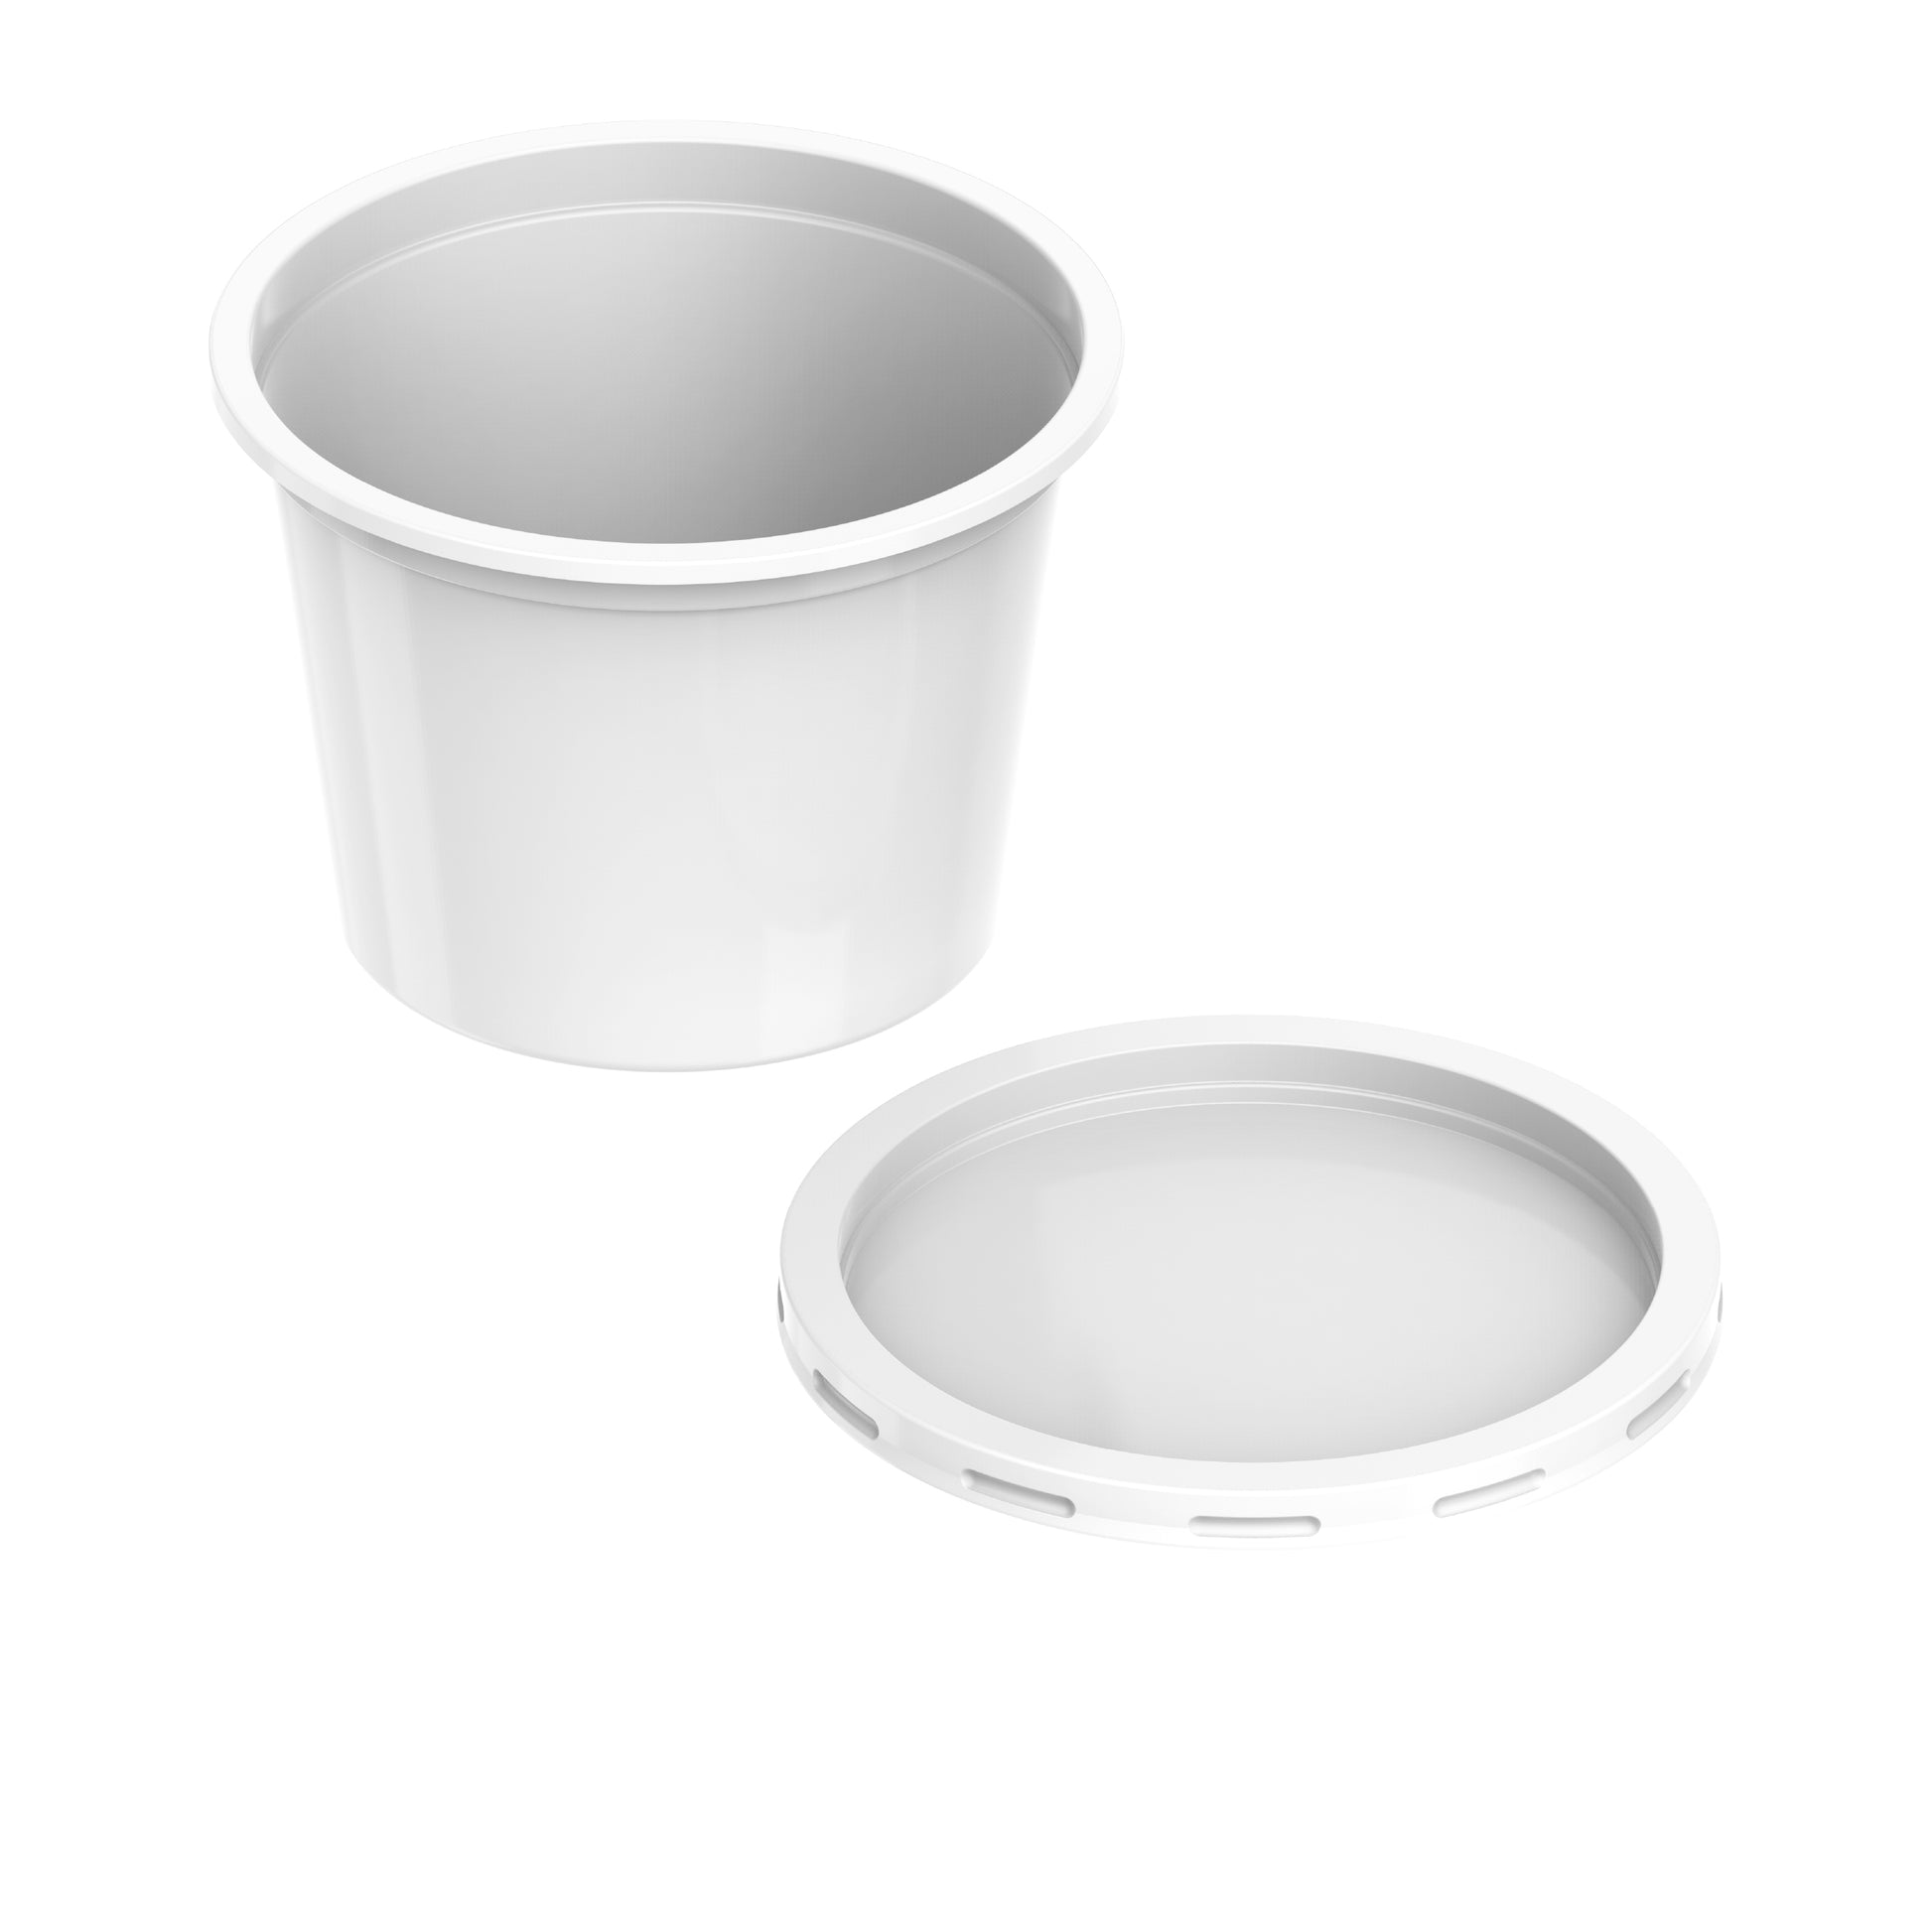 500 ml Pack of 20 Plastic White Catering Containers with White Lids